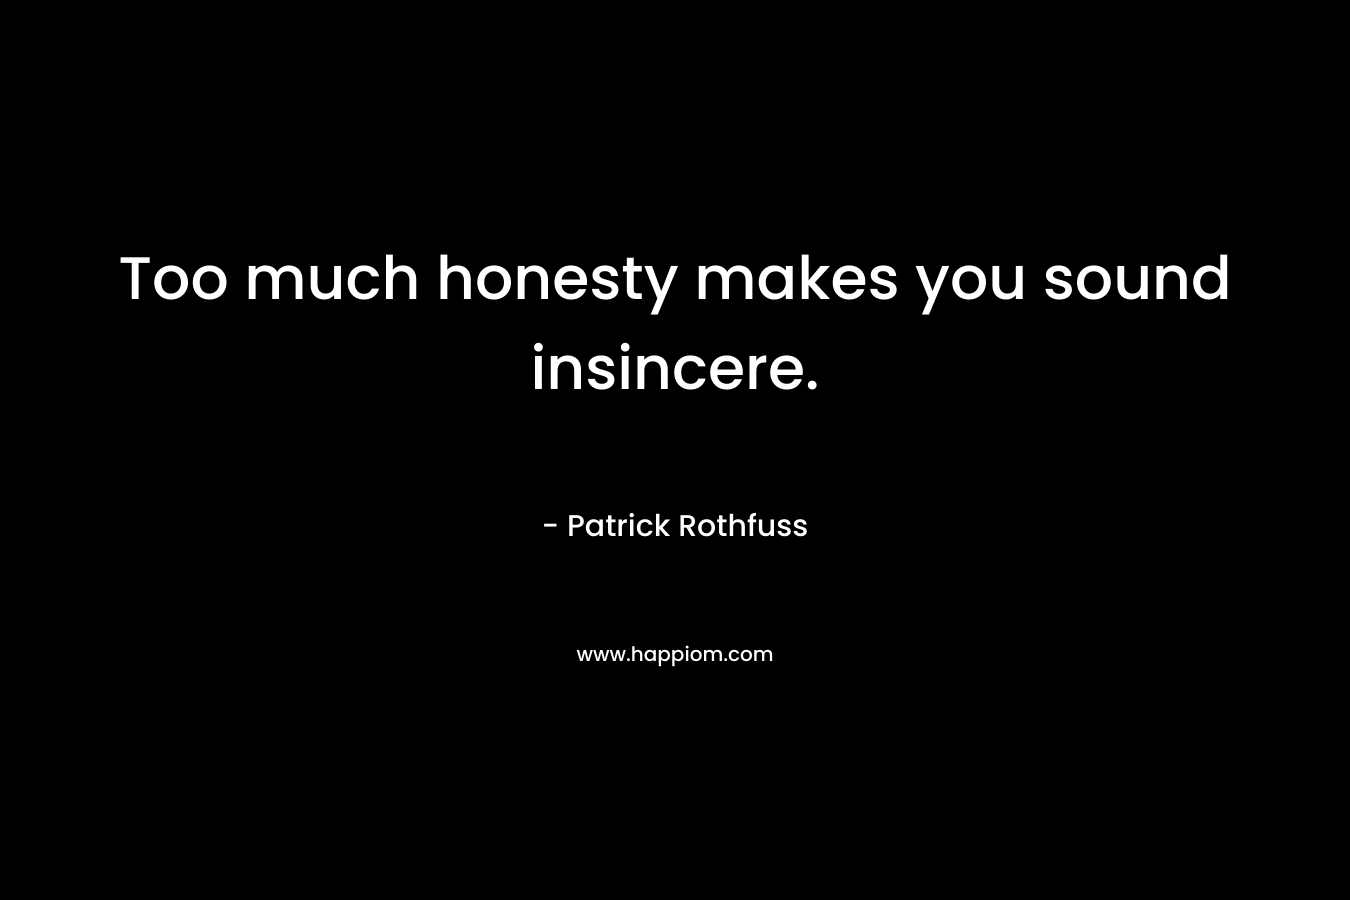 Too much honesty makes you sound insincere. – Patrick Rothfuss